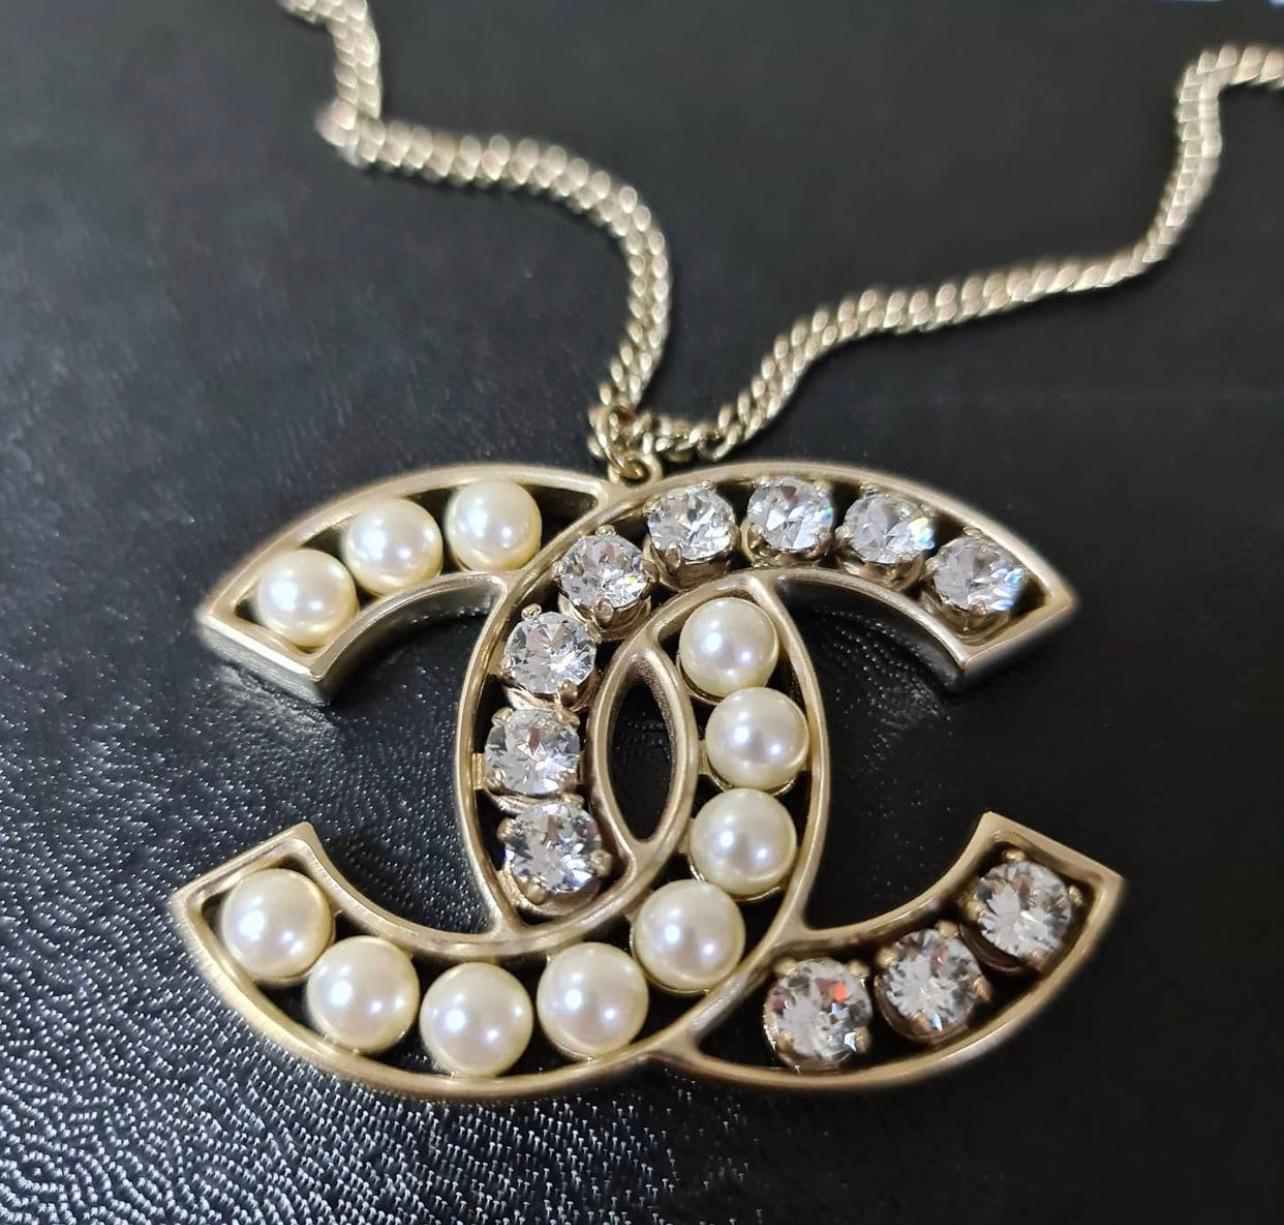 Chanel  Crystal & Pearl CC Necklace


Year of Production: 2014
Color: Goldtone
Materials: Metal, faux pearl, crystal
Closure: Lobster clasp
Condition: Excellent 

Measurements: 
Length: 23